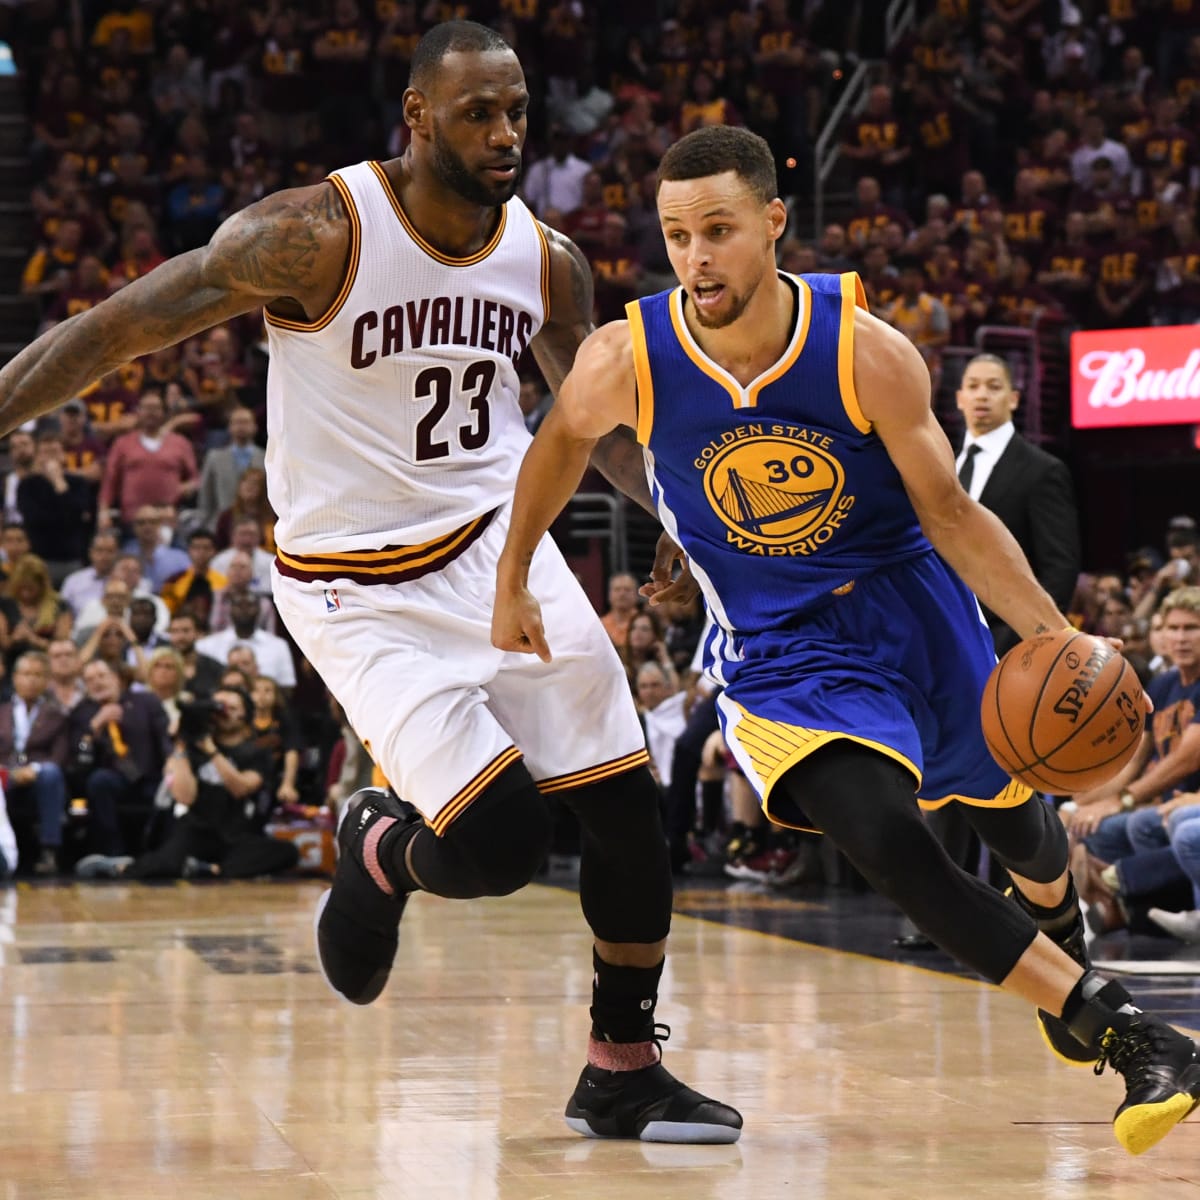 Steph Curry and LeBron James Meet in the Playoffs, Maybe for the Last Time  - The New York Times